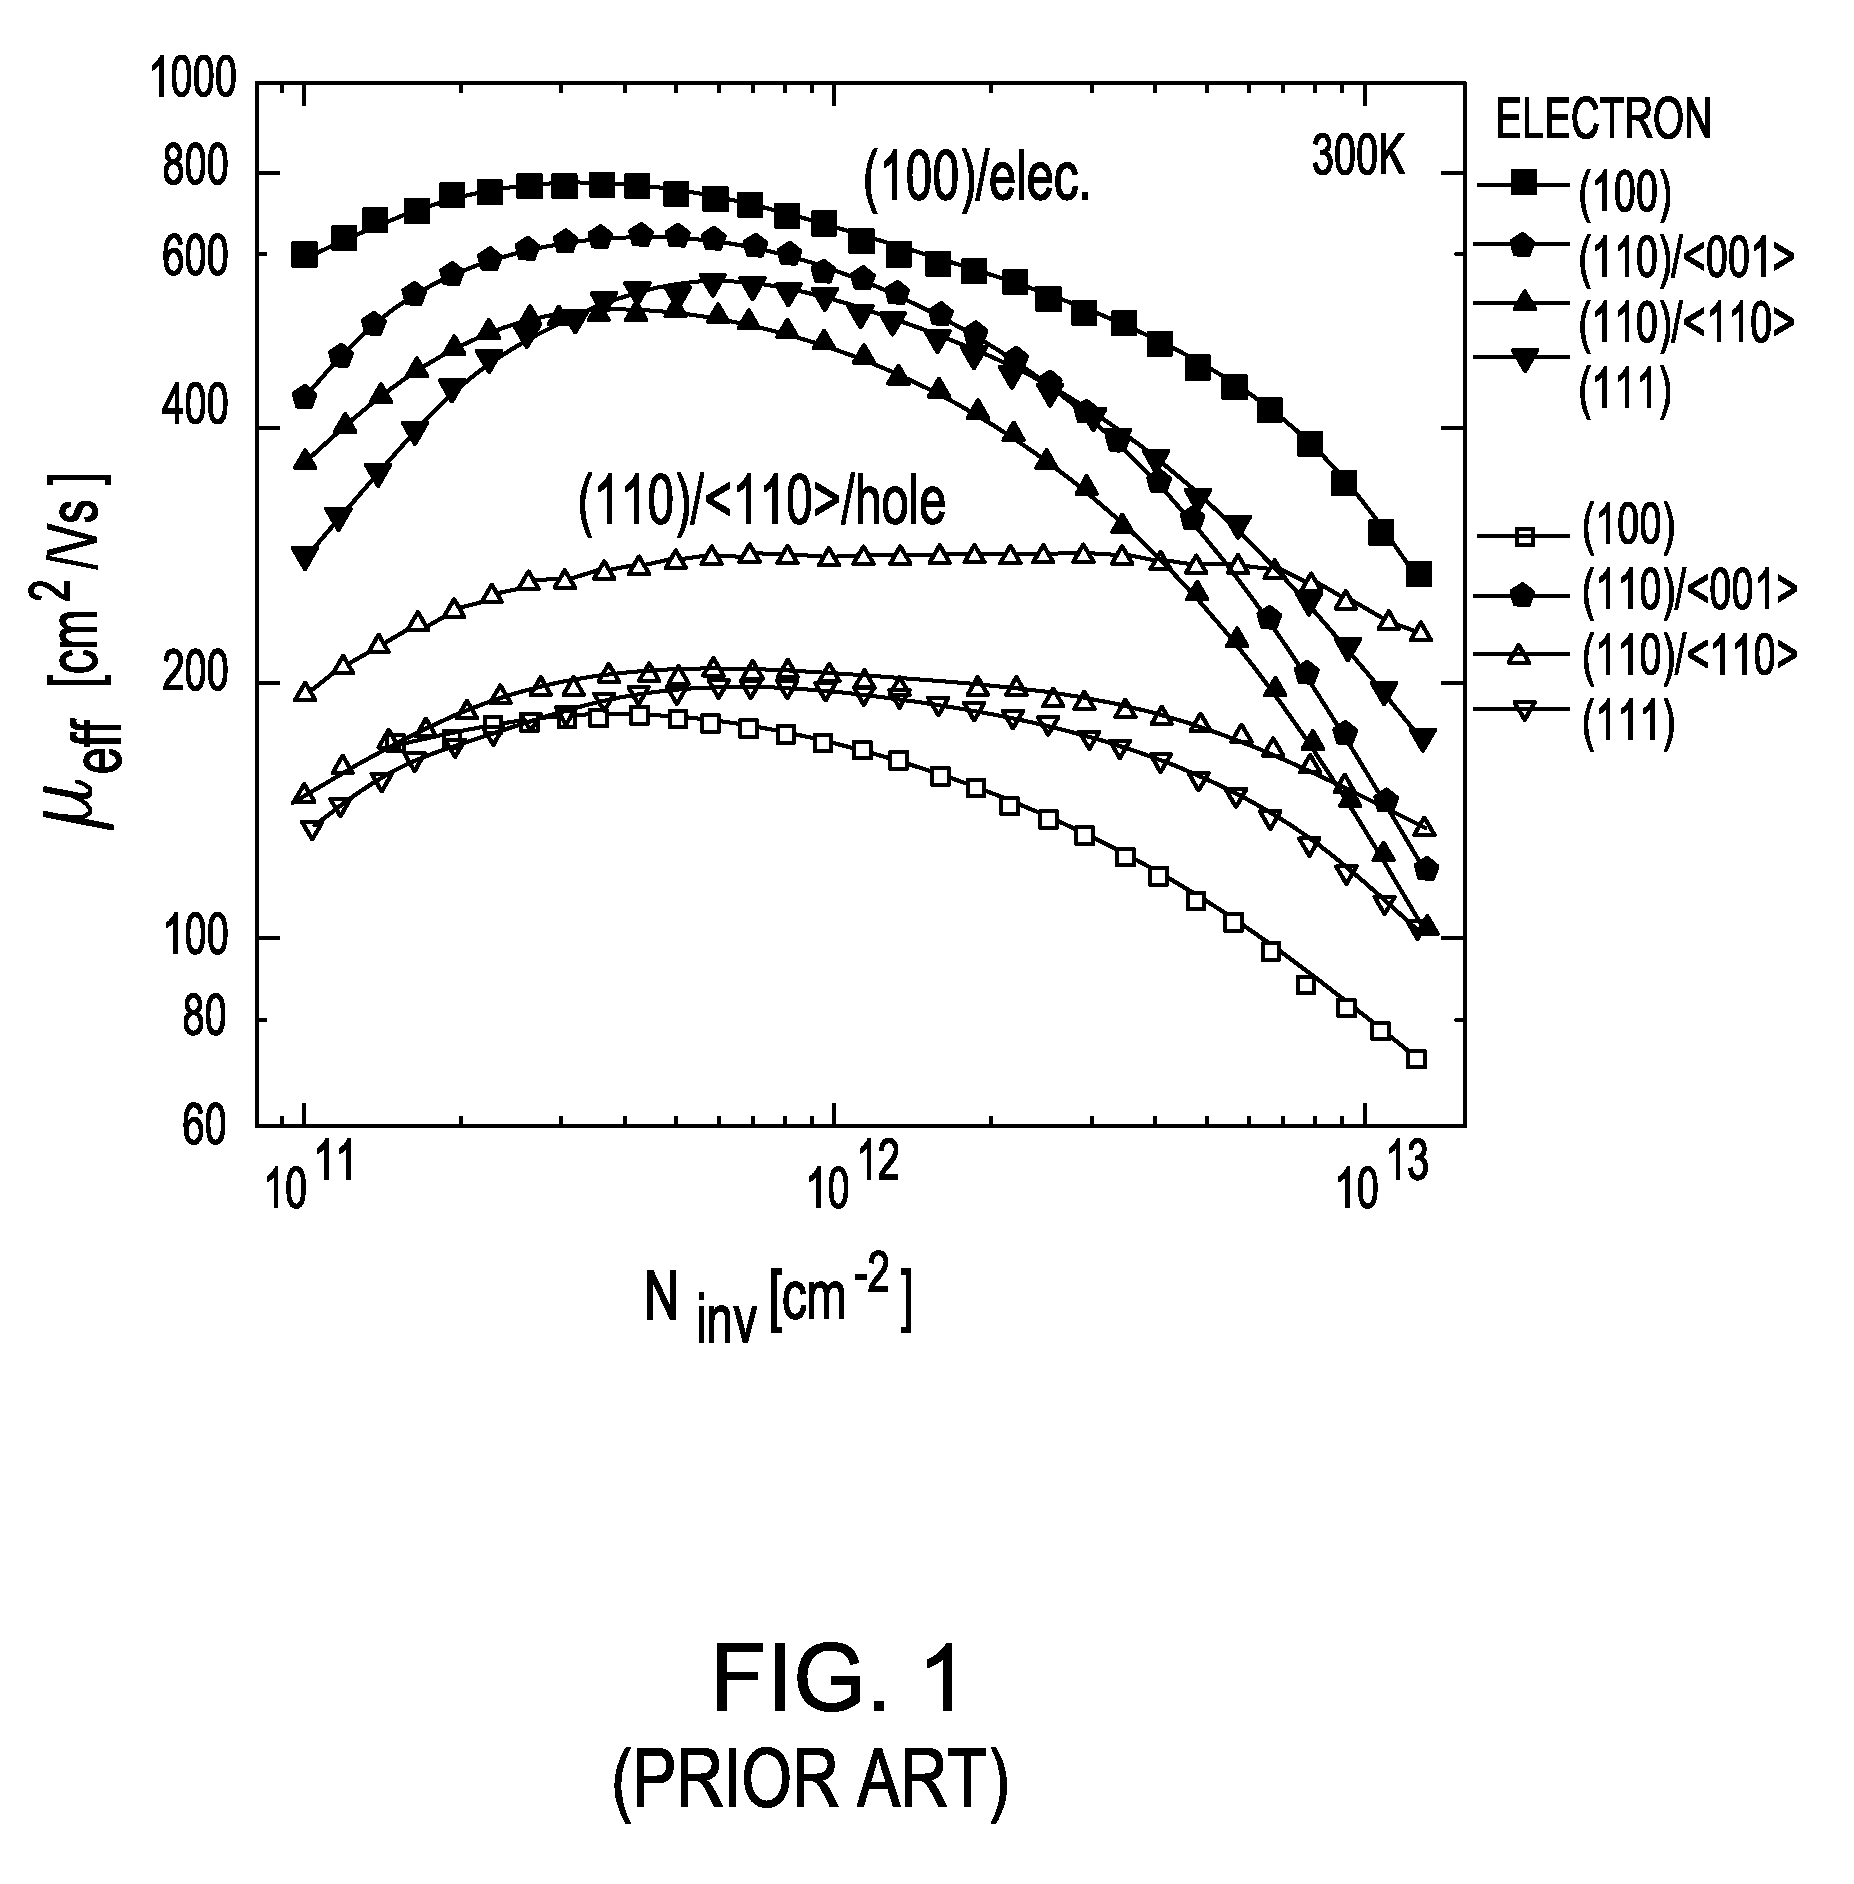 Sub-lithographic faceting for mosfet performance enhancement